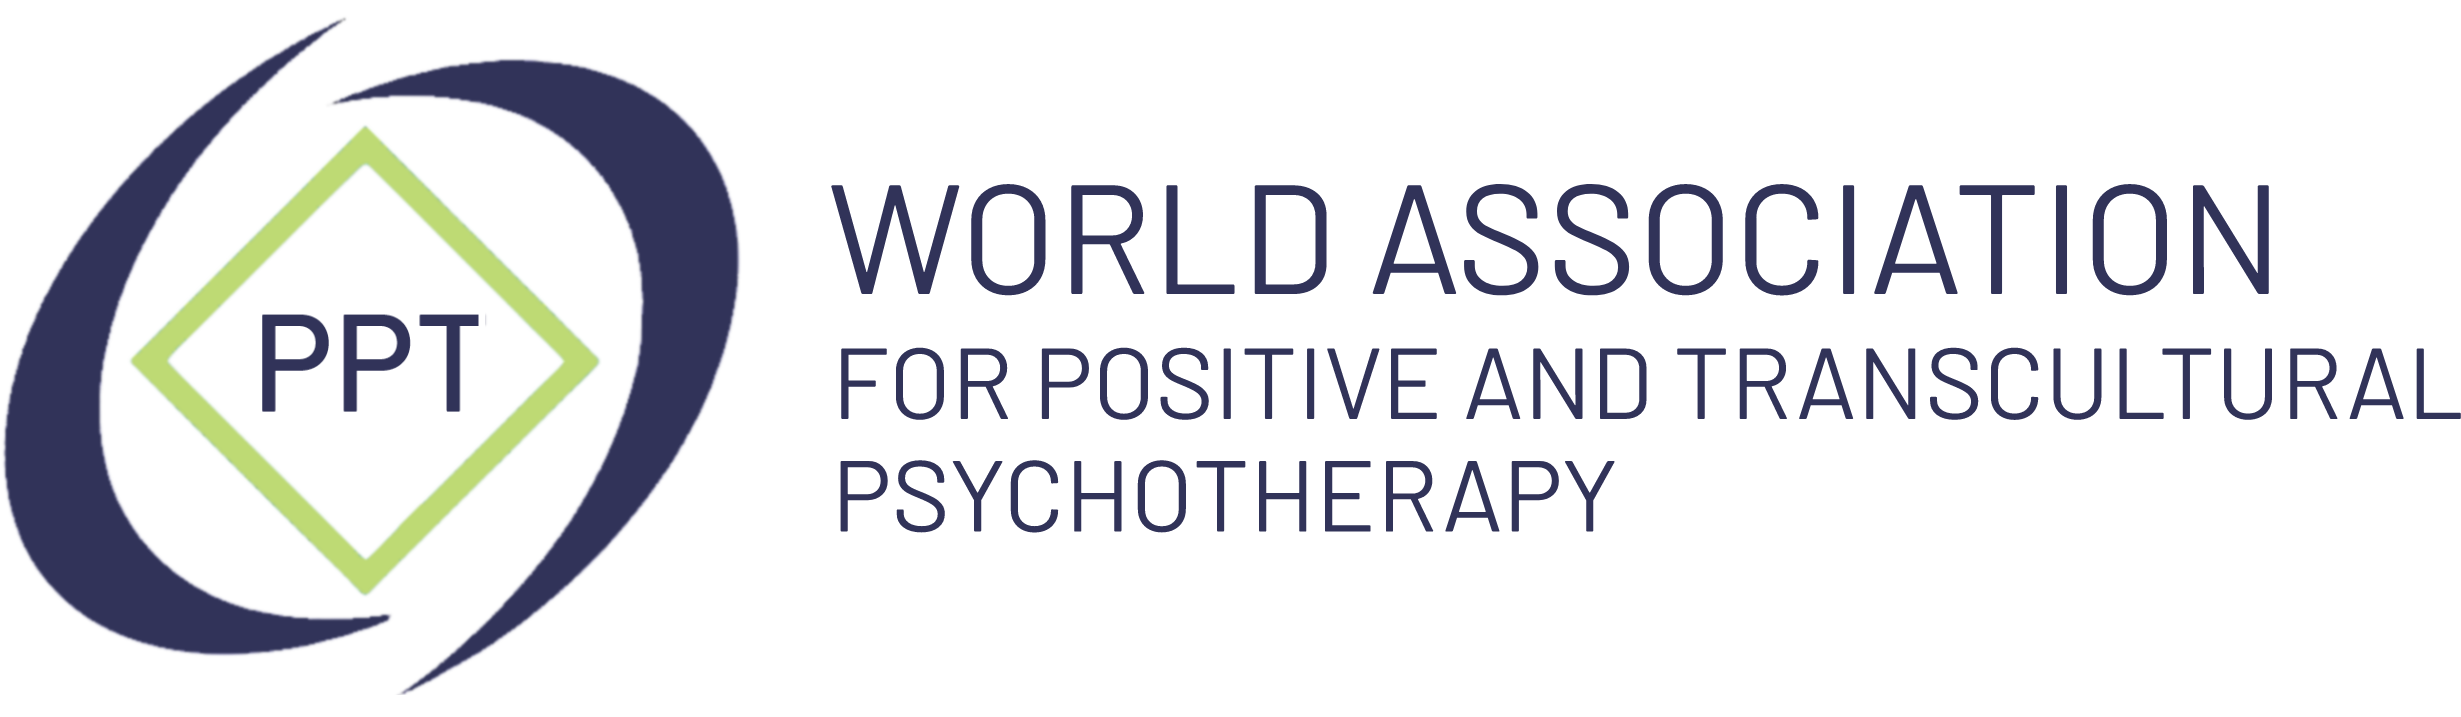 World Association for Positive and Transcultural Psychotherapy